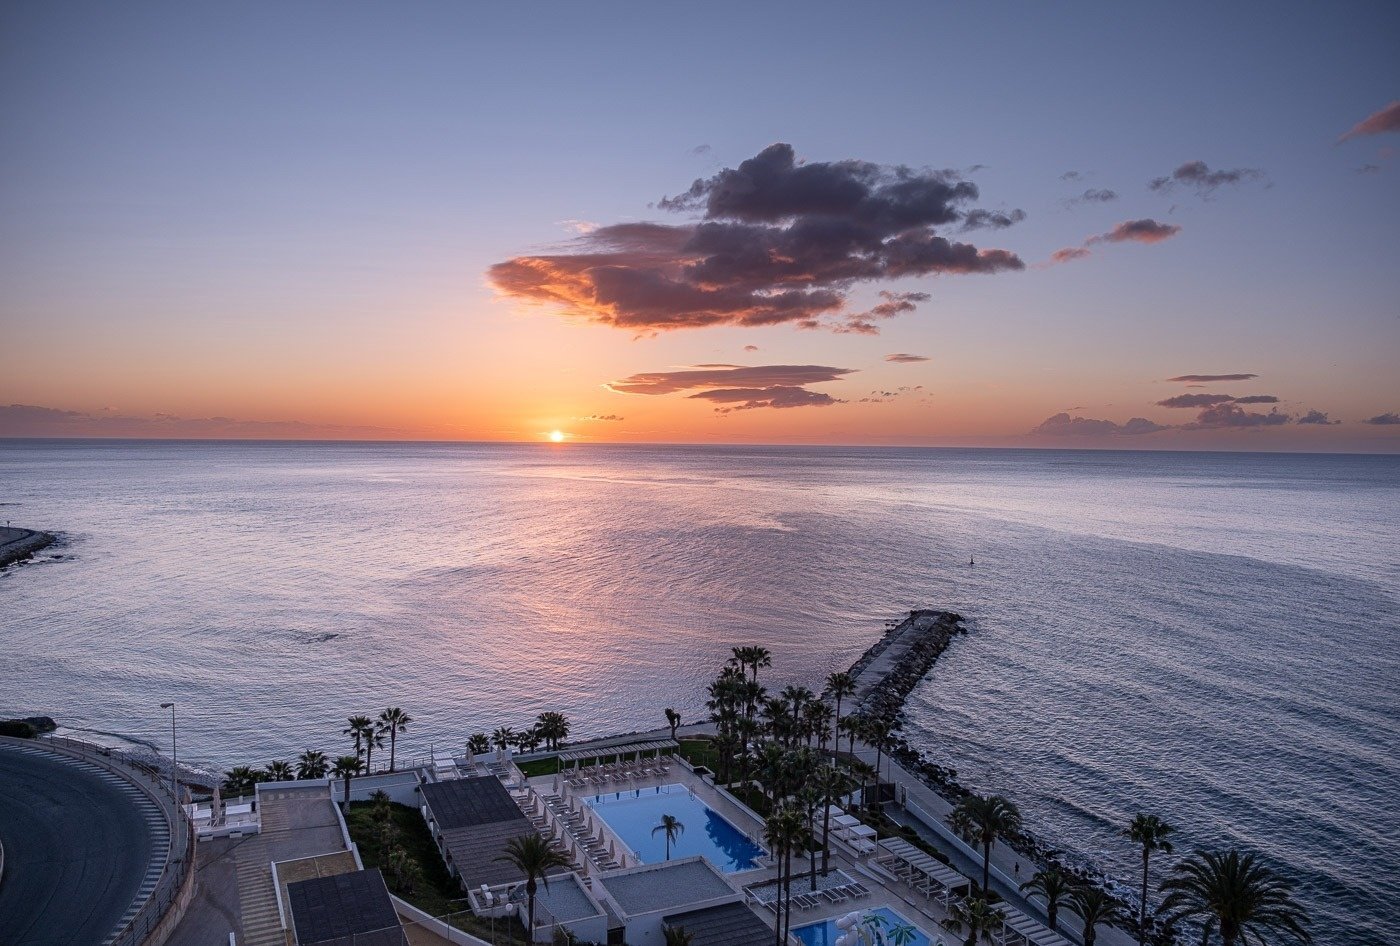 a sunset over the ocean with a swimming pool in the foreground